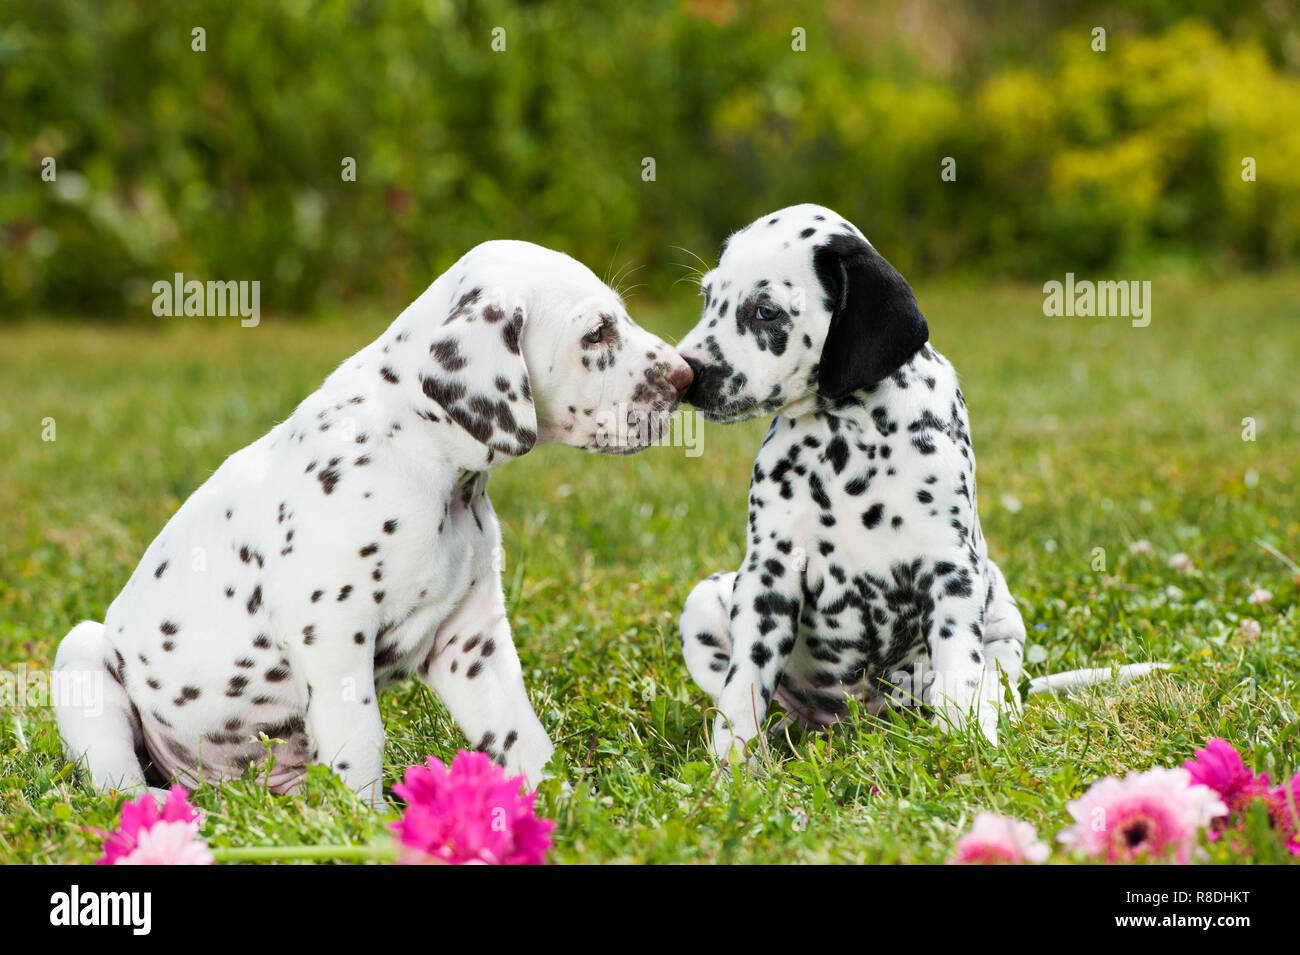 Page 3 Dalmatian Dog Puppies High Resolution Stock Photography And Images Alamy